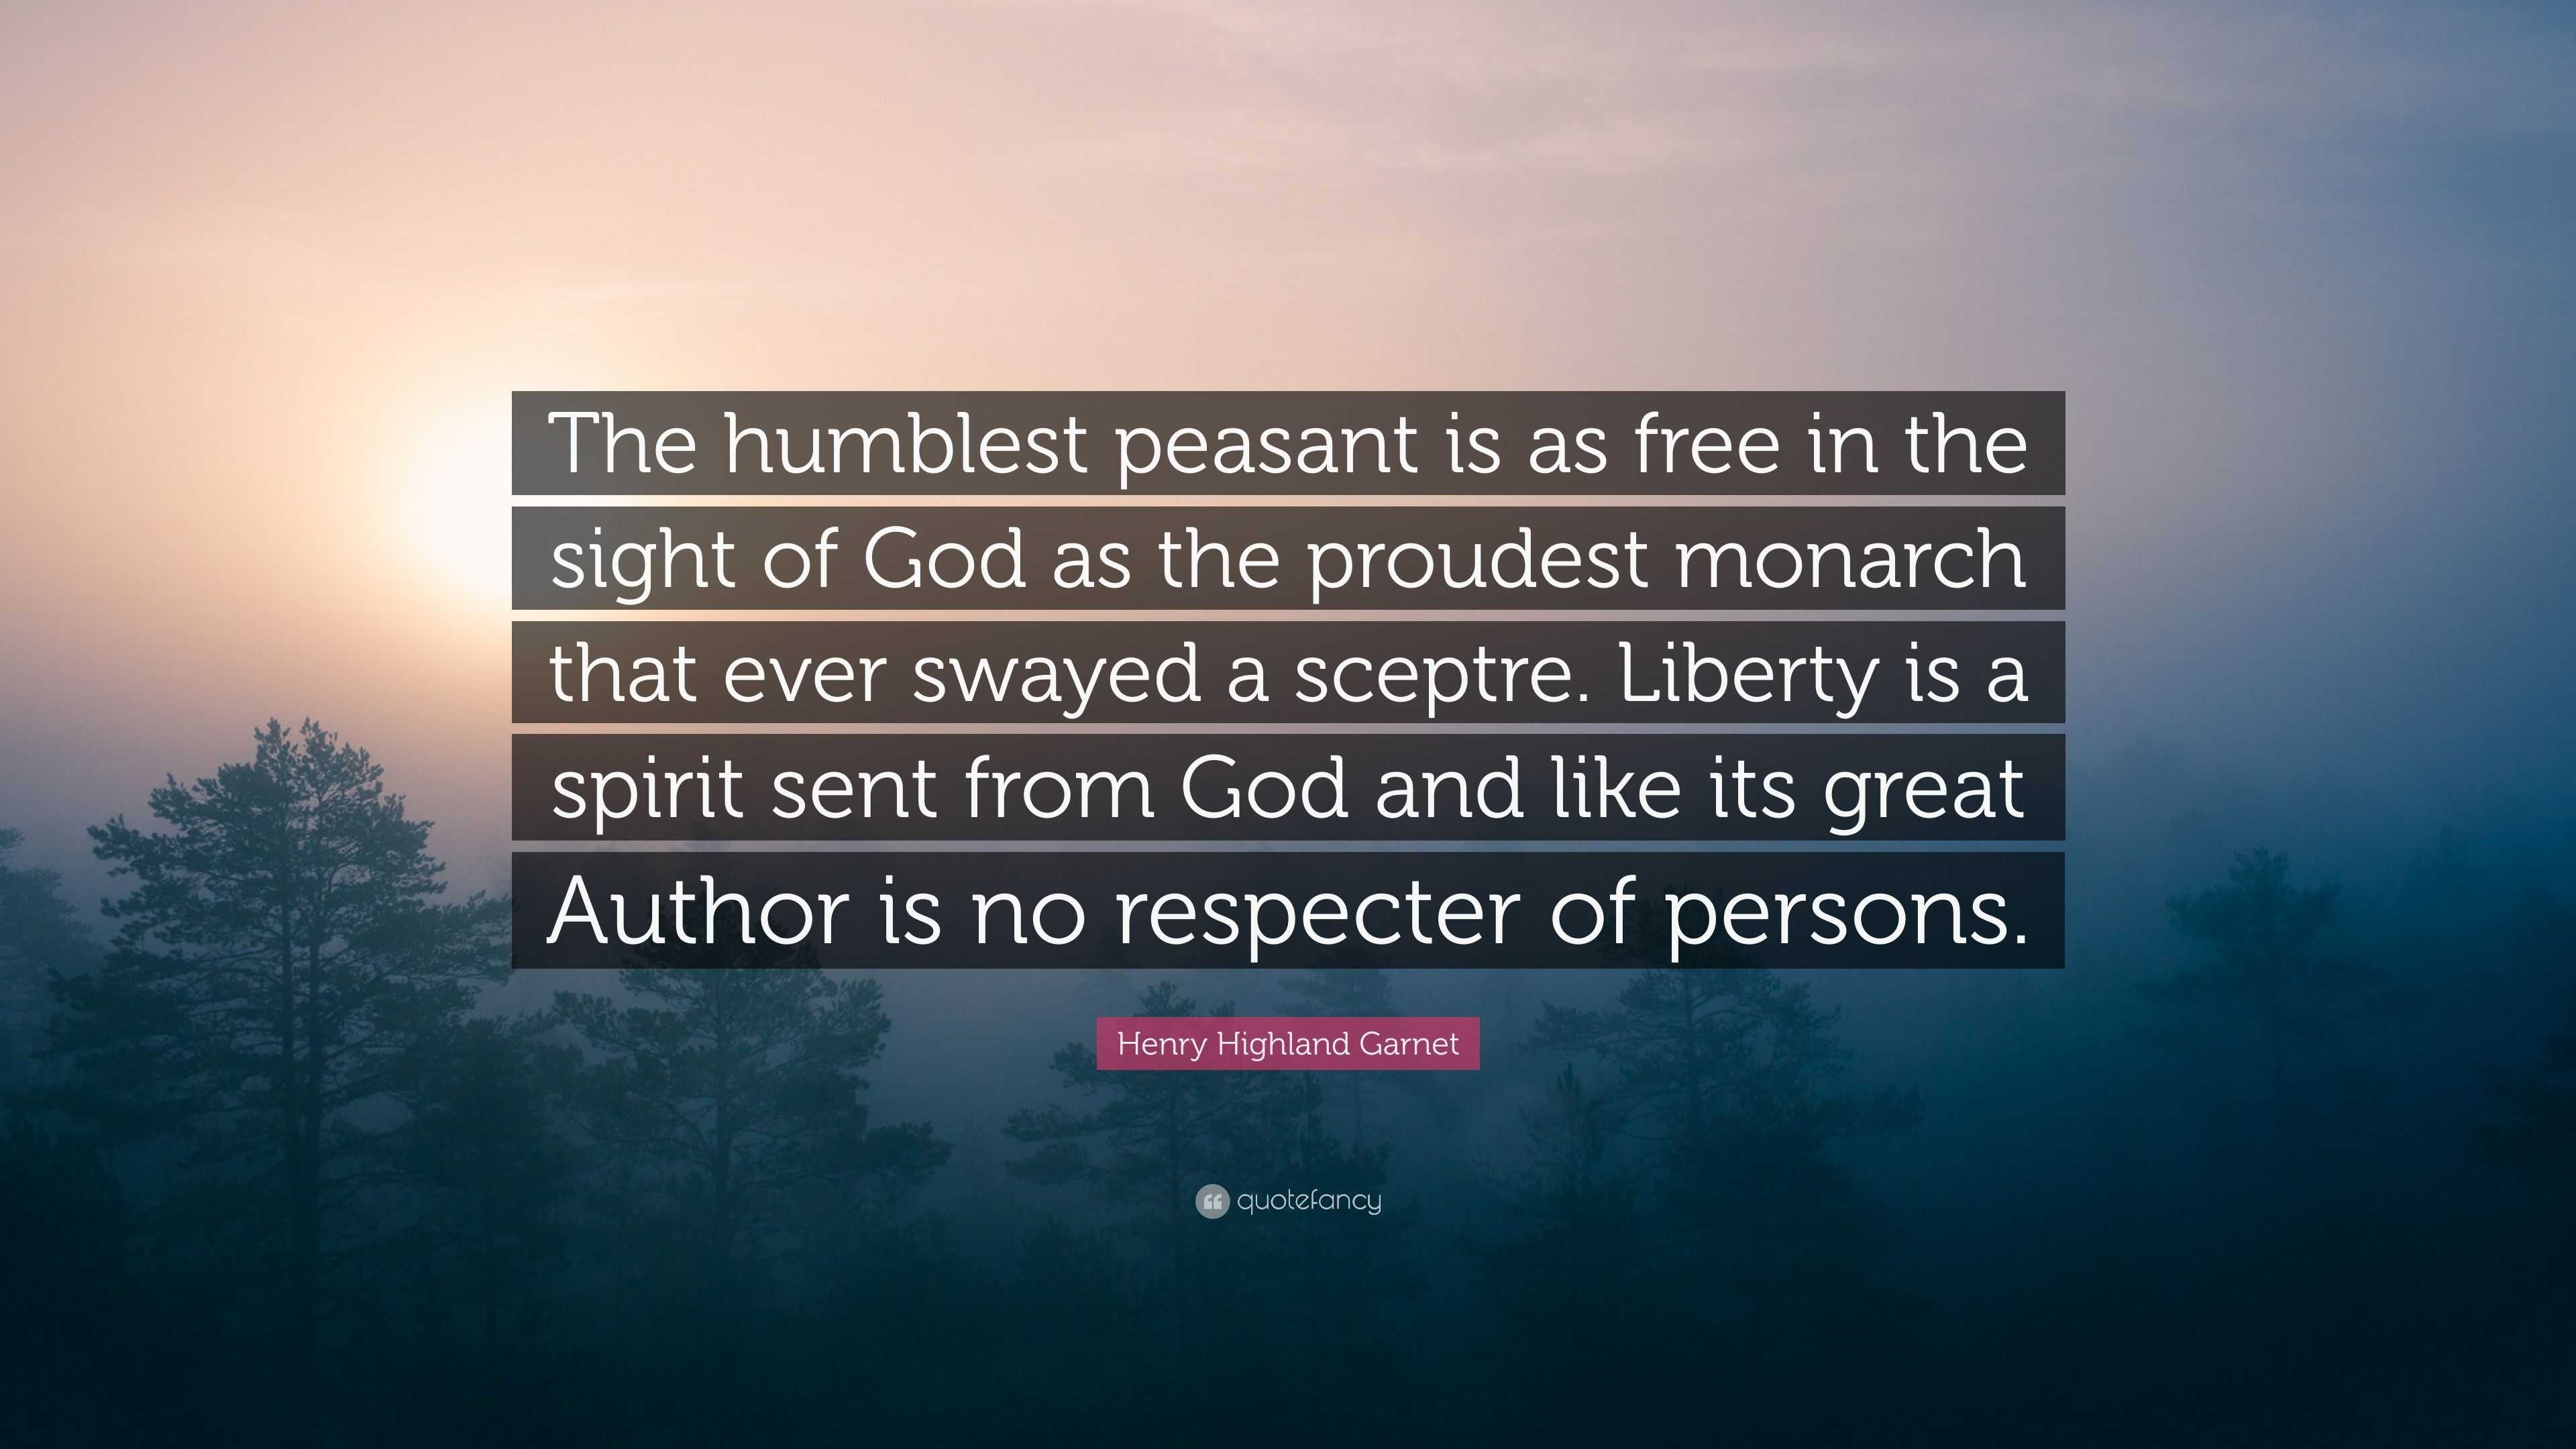 Henry Highland Garnet Quote: “The humblest peasant is as free in sight of God as the proudest monarch that ever swayed a sceptre. Liberty is a spi...”